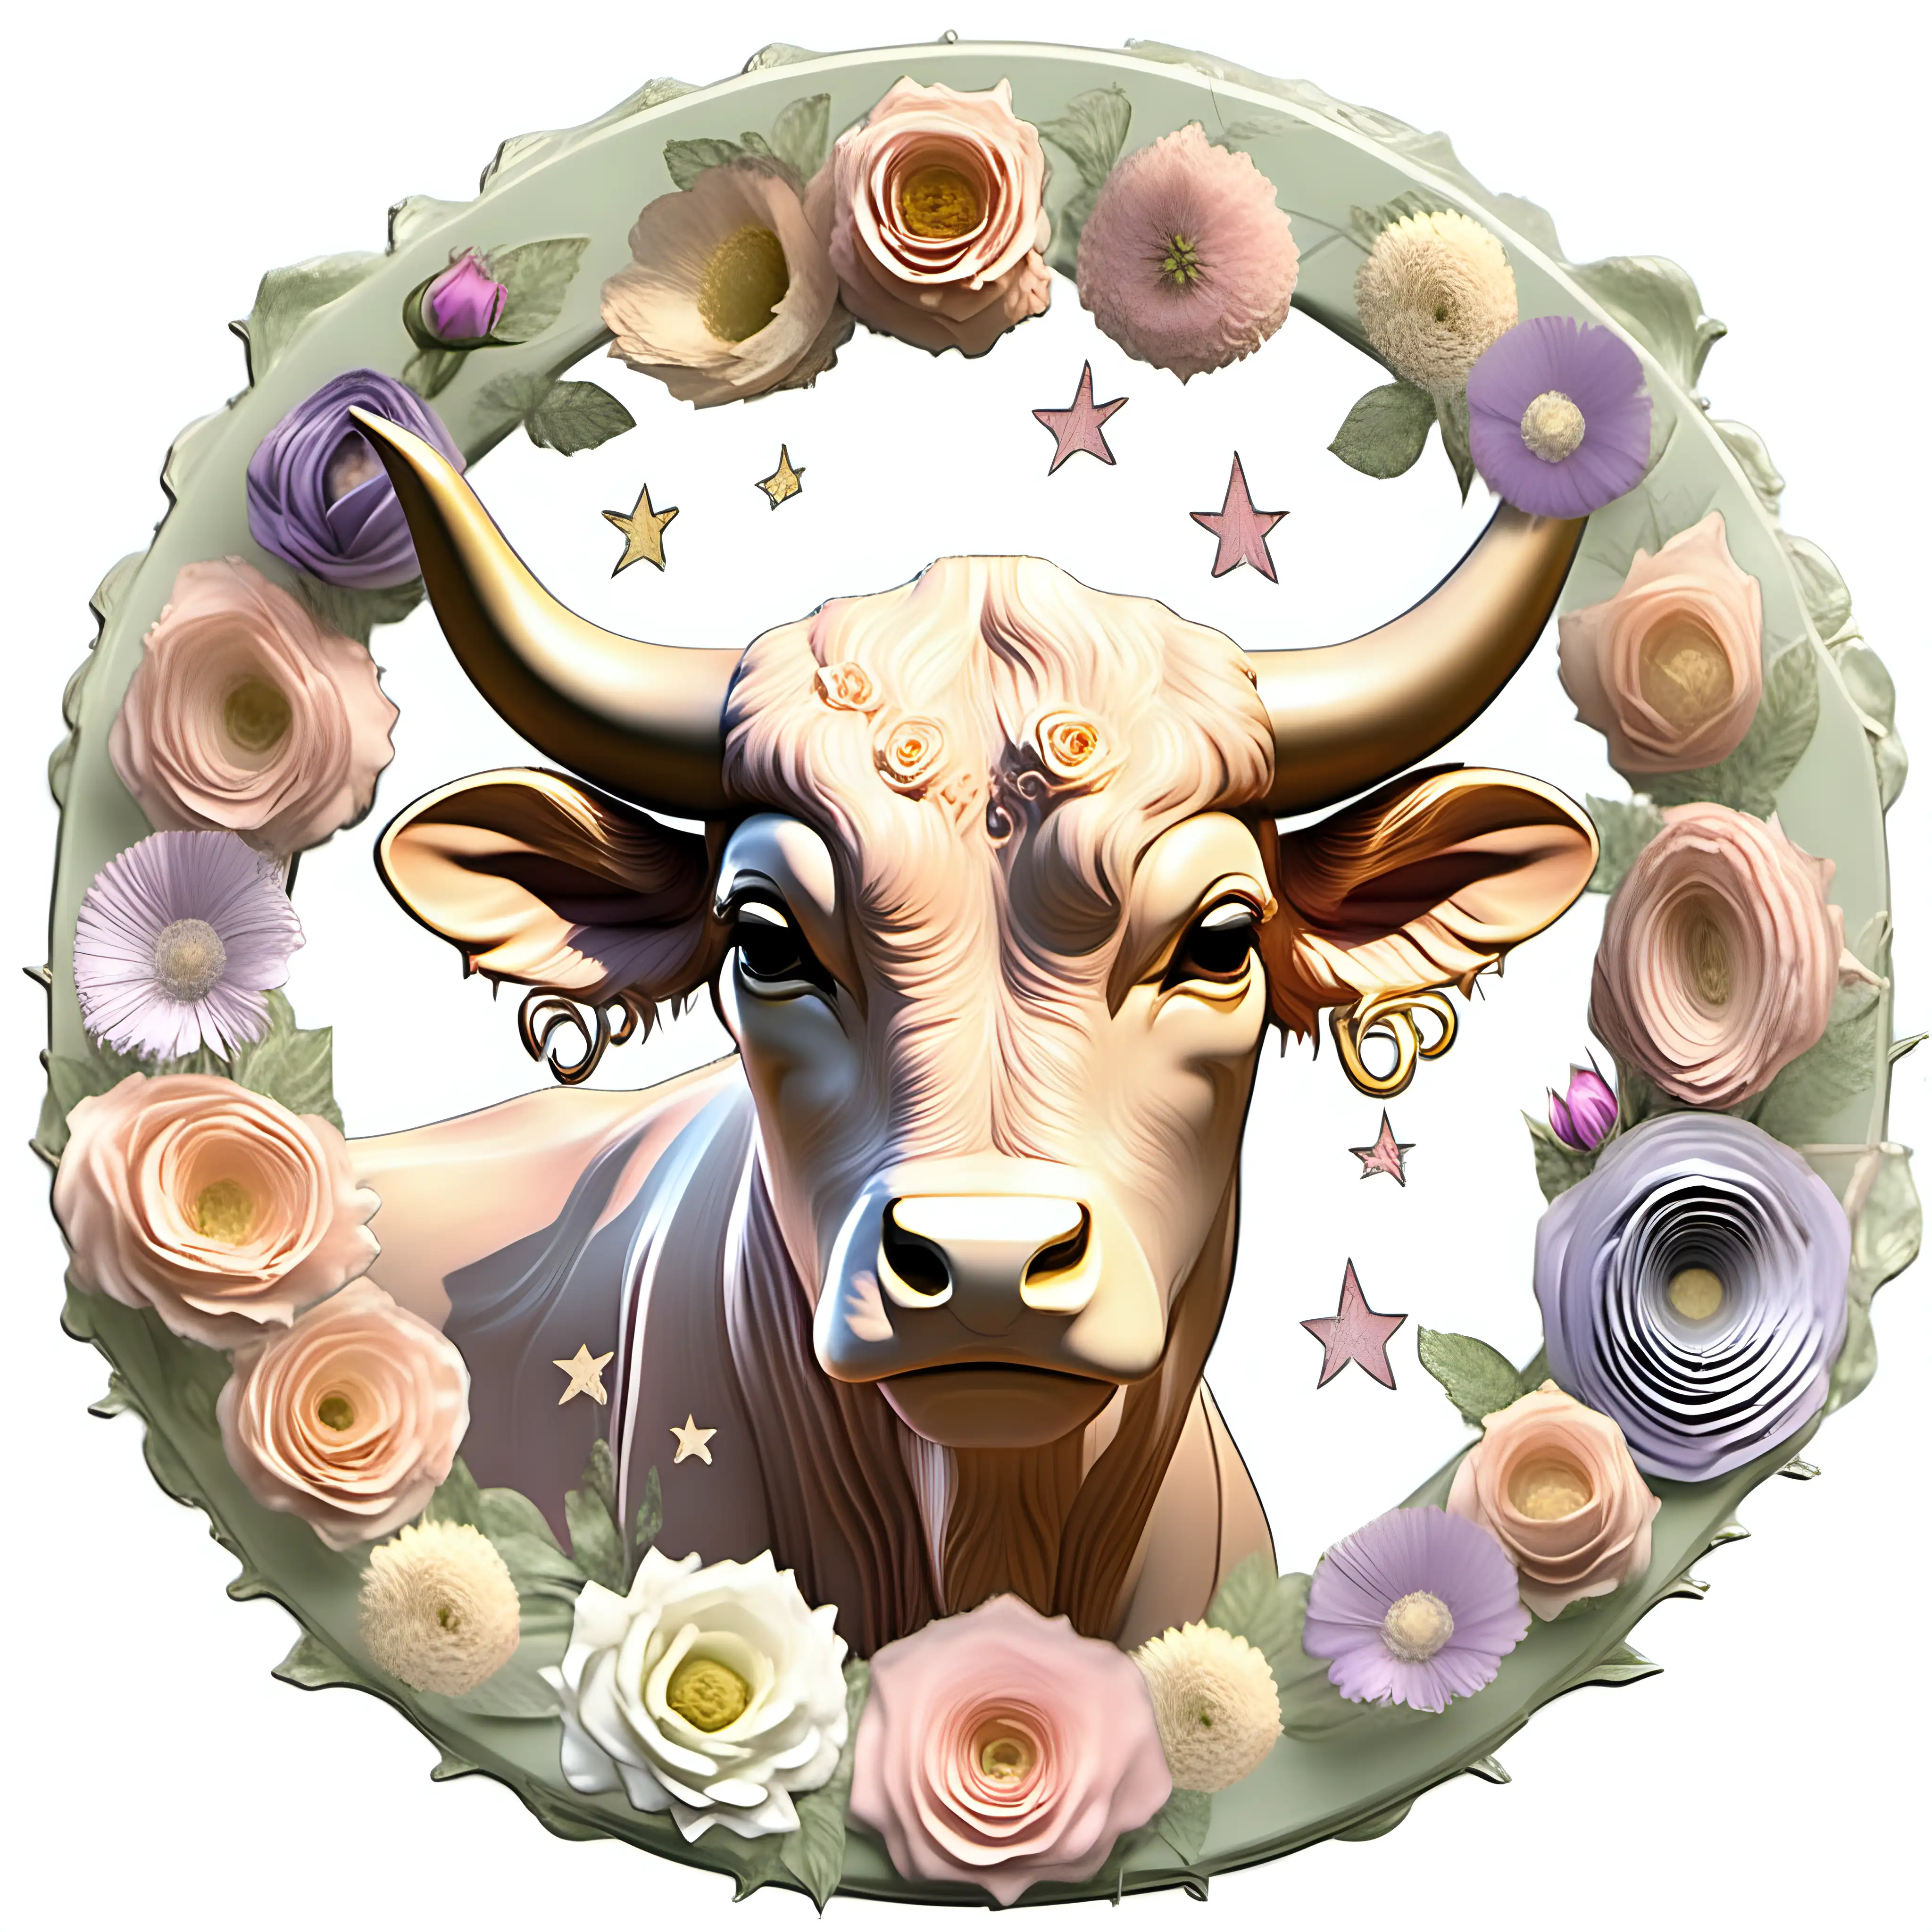 Taurus Zodiac Sign with Pastel Shabby Chic Floral Accents